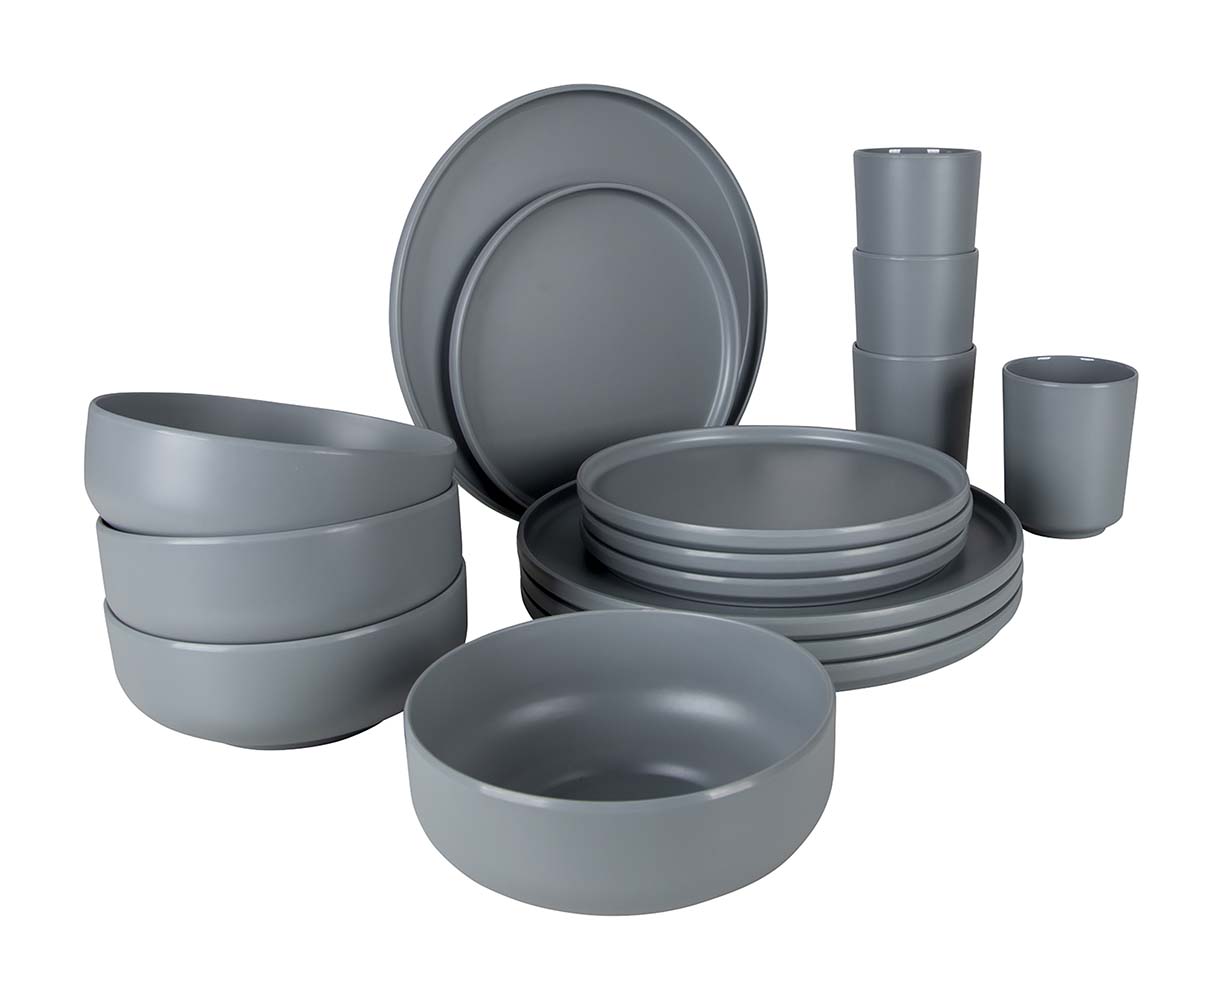 Bo-Camp - Industrial collection - Tableware - Patom - Melamine - 16 Pieces - Light grey